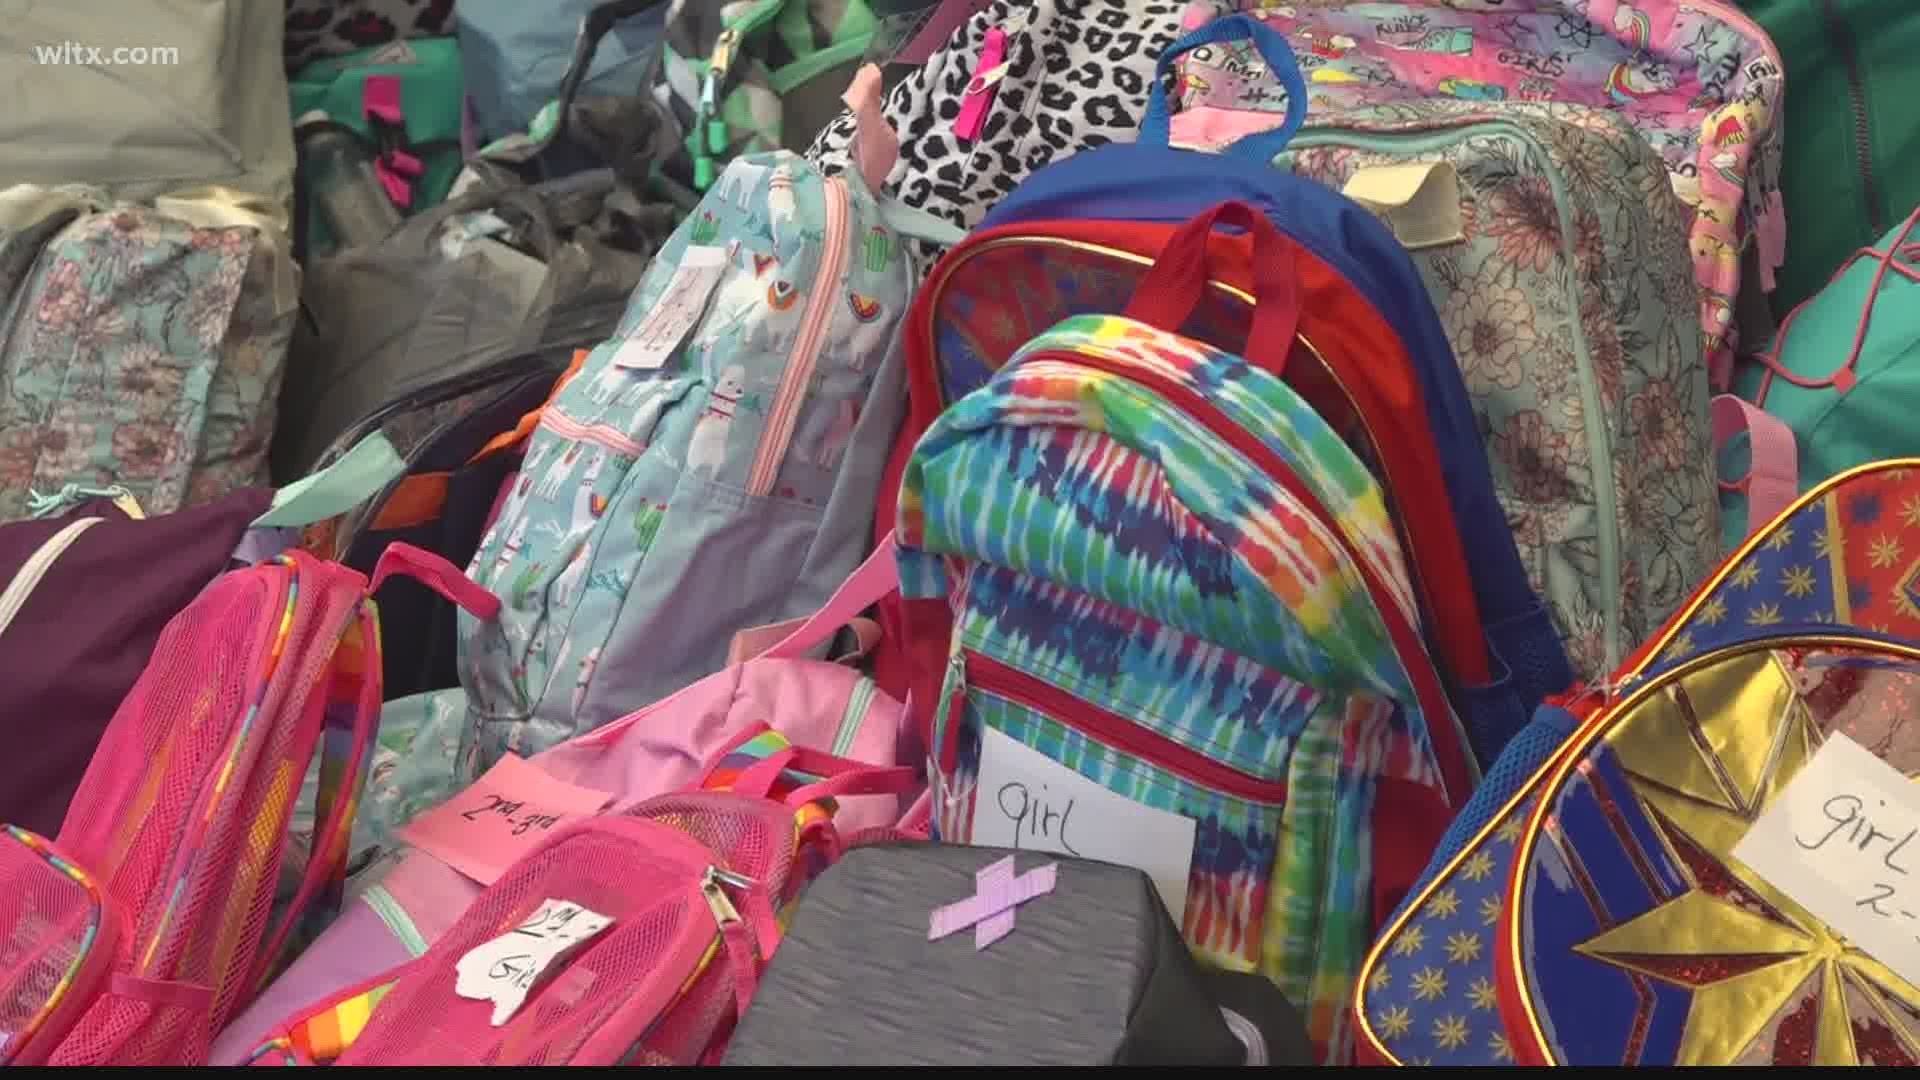 Hundreds of donated backpacks given to school children